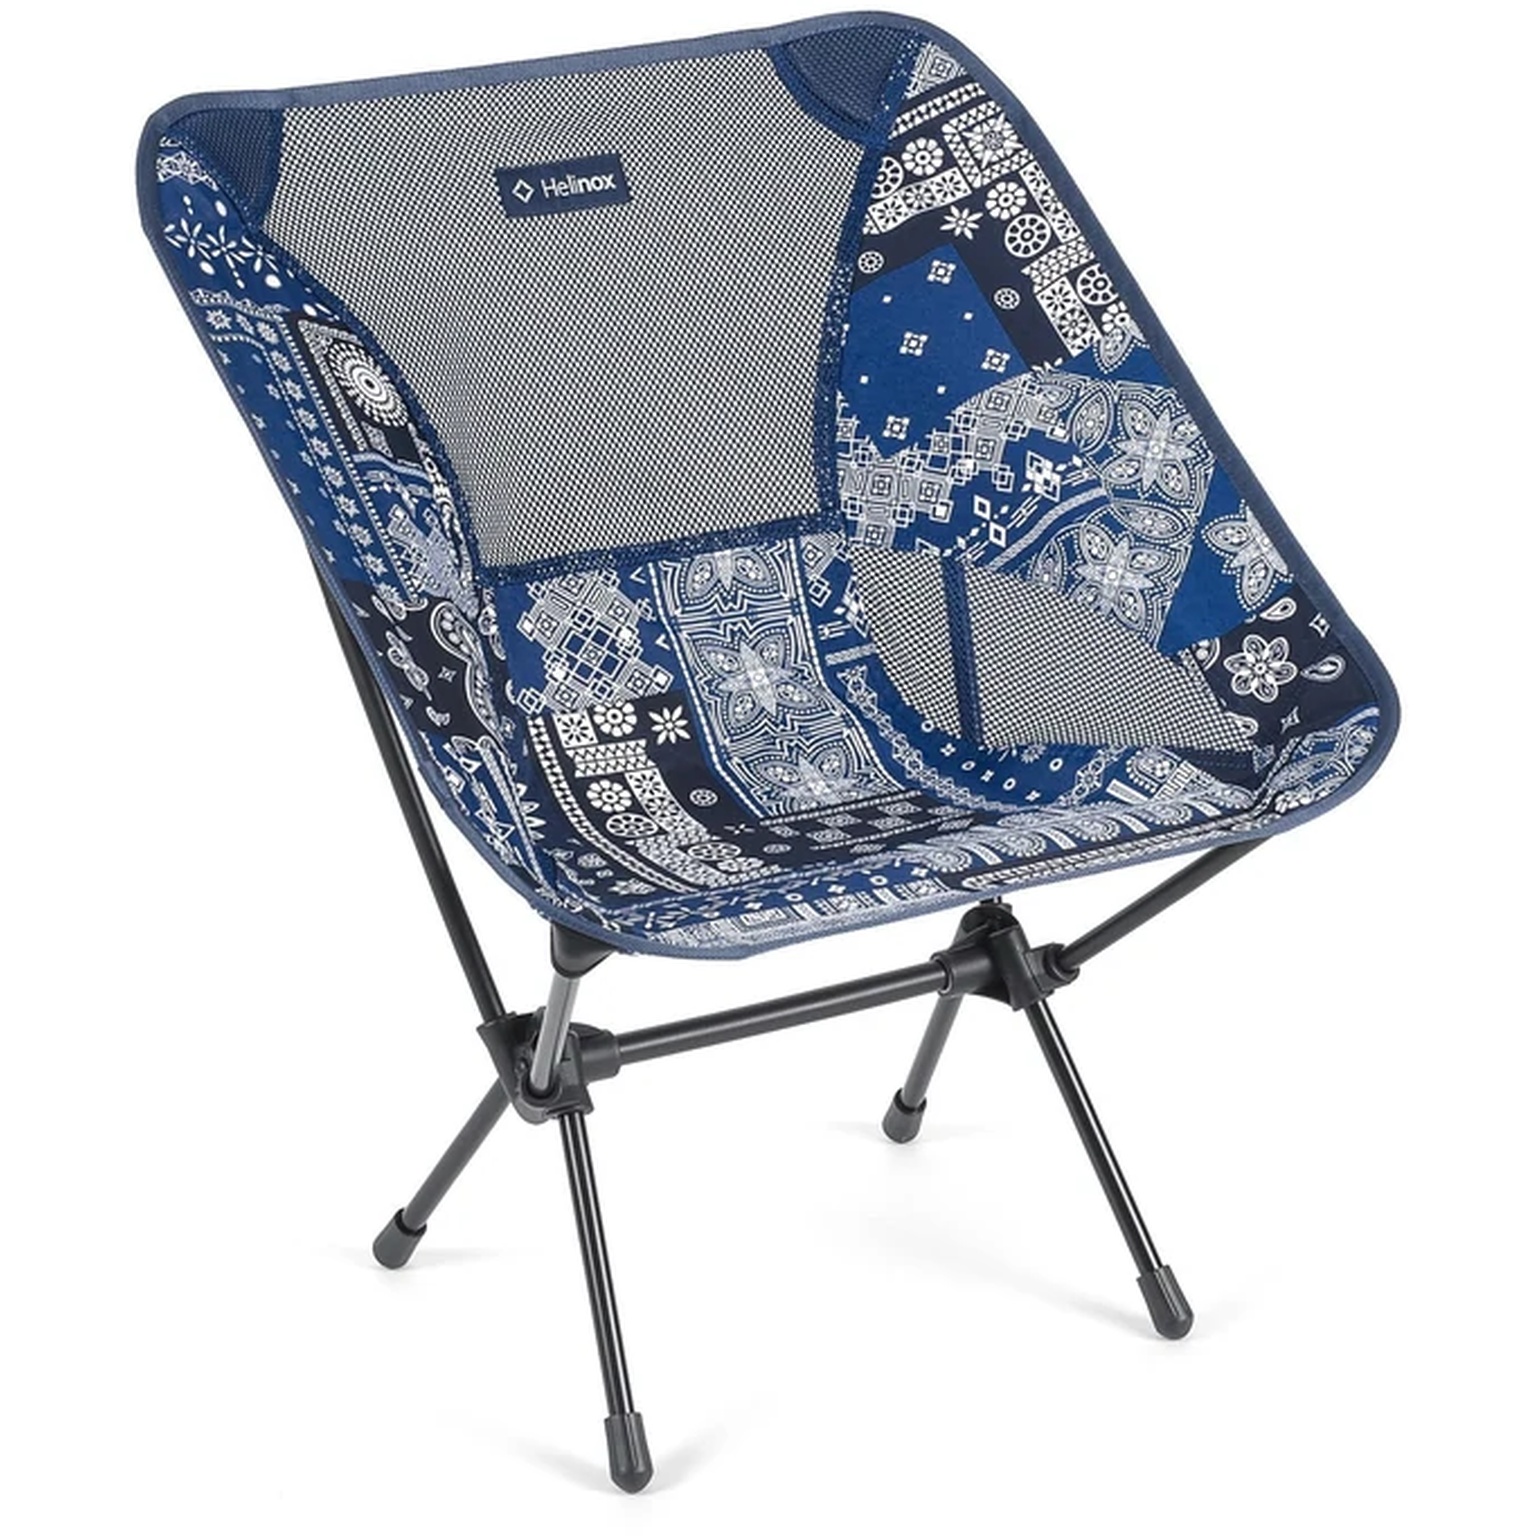 Picture of Helinox Chair One Camping Chair - blue bandanna quilt - black